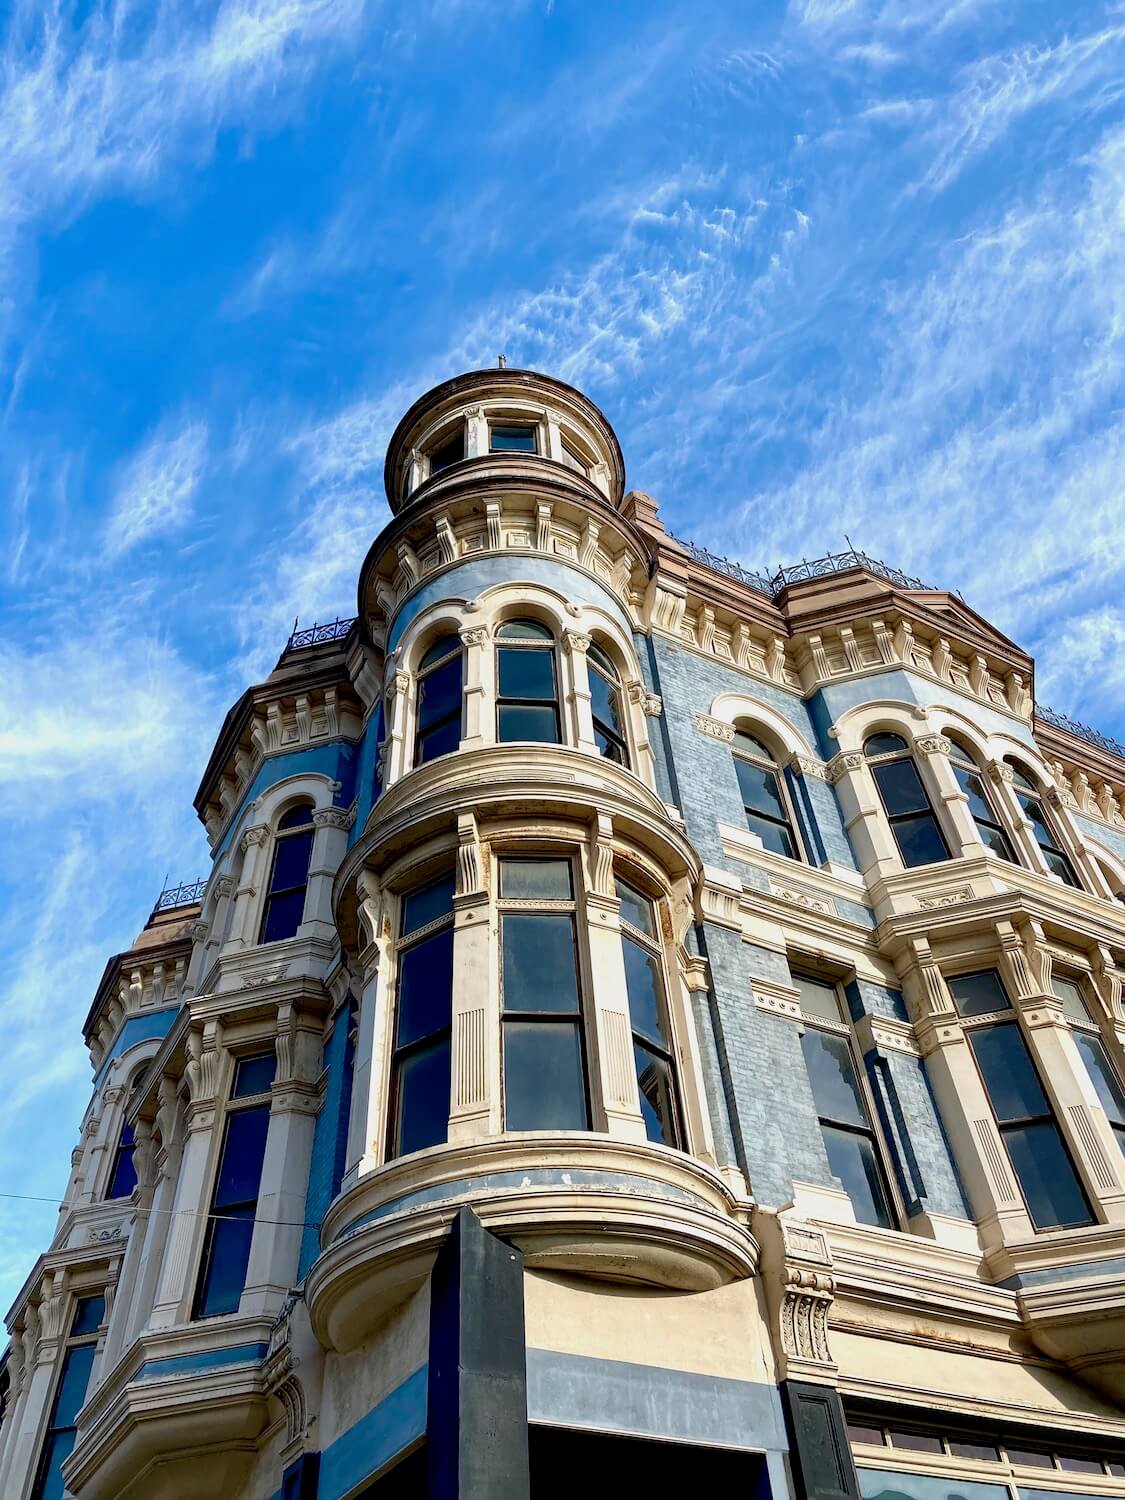 A towering Victorian building rises up on the Main Street of downtown Port Townsend. The ornate three story building utilities a combination of light blue brick with ornate white bordered windows with metal fencing like grating that lines the roof. The sky above is blue with swirls of white clouds.